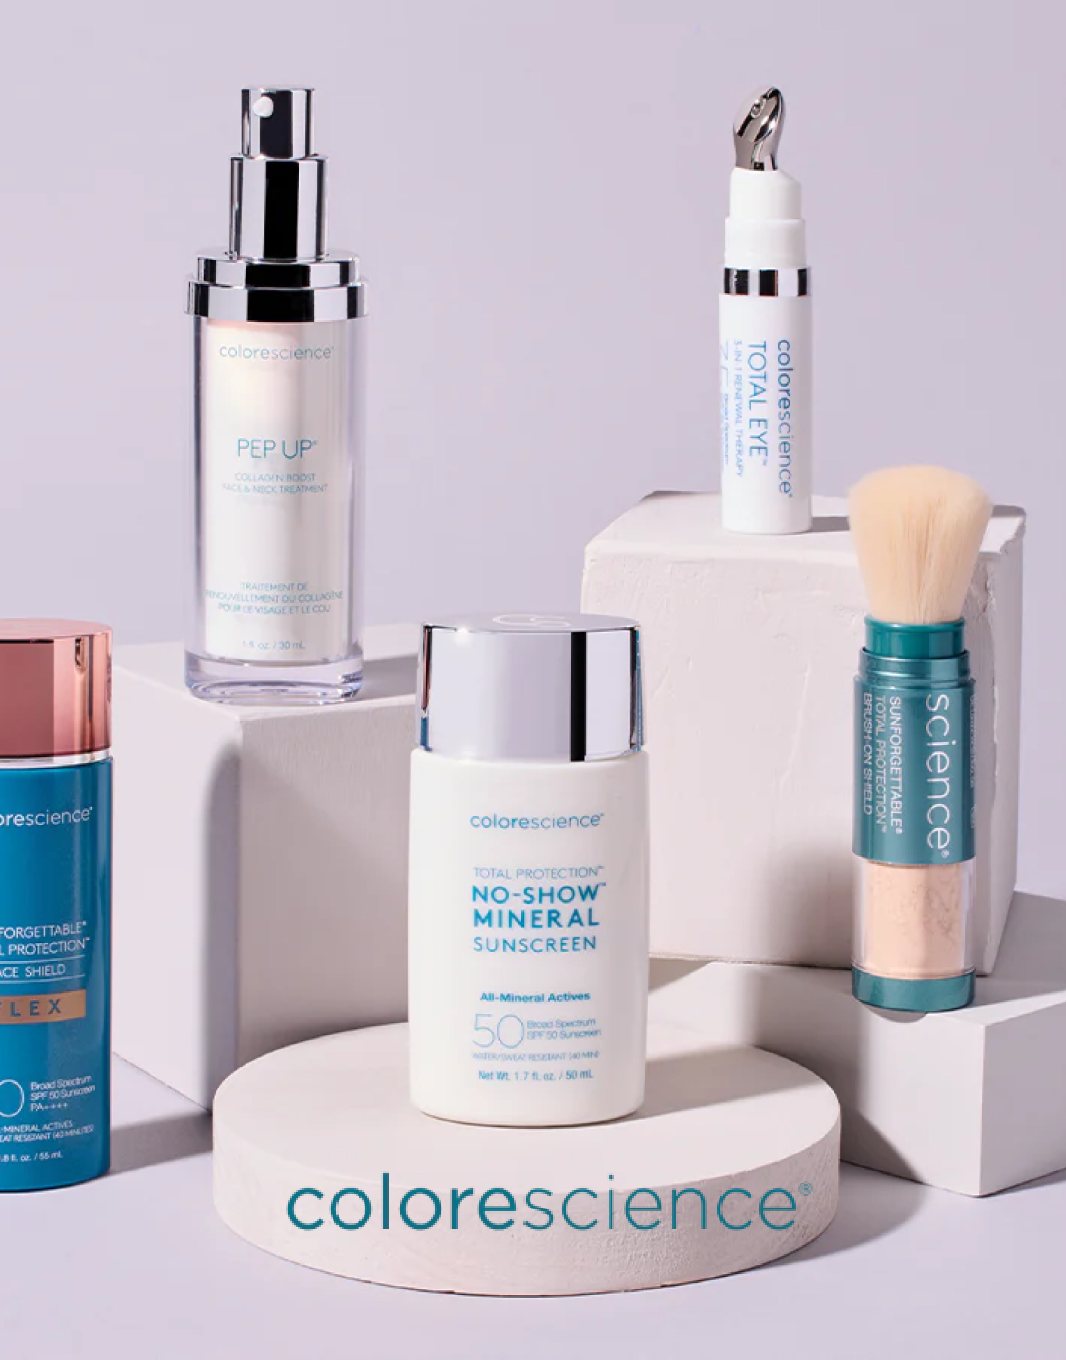 Colorscience skincare products